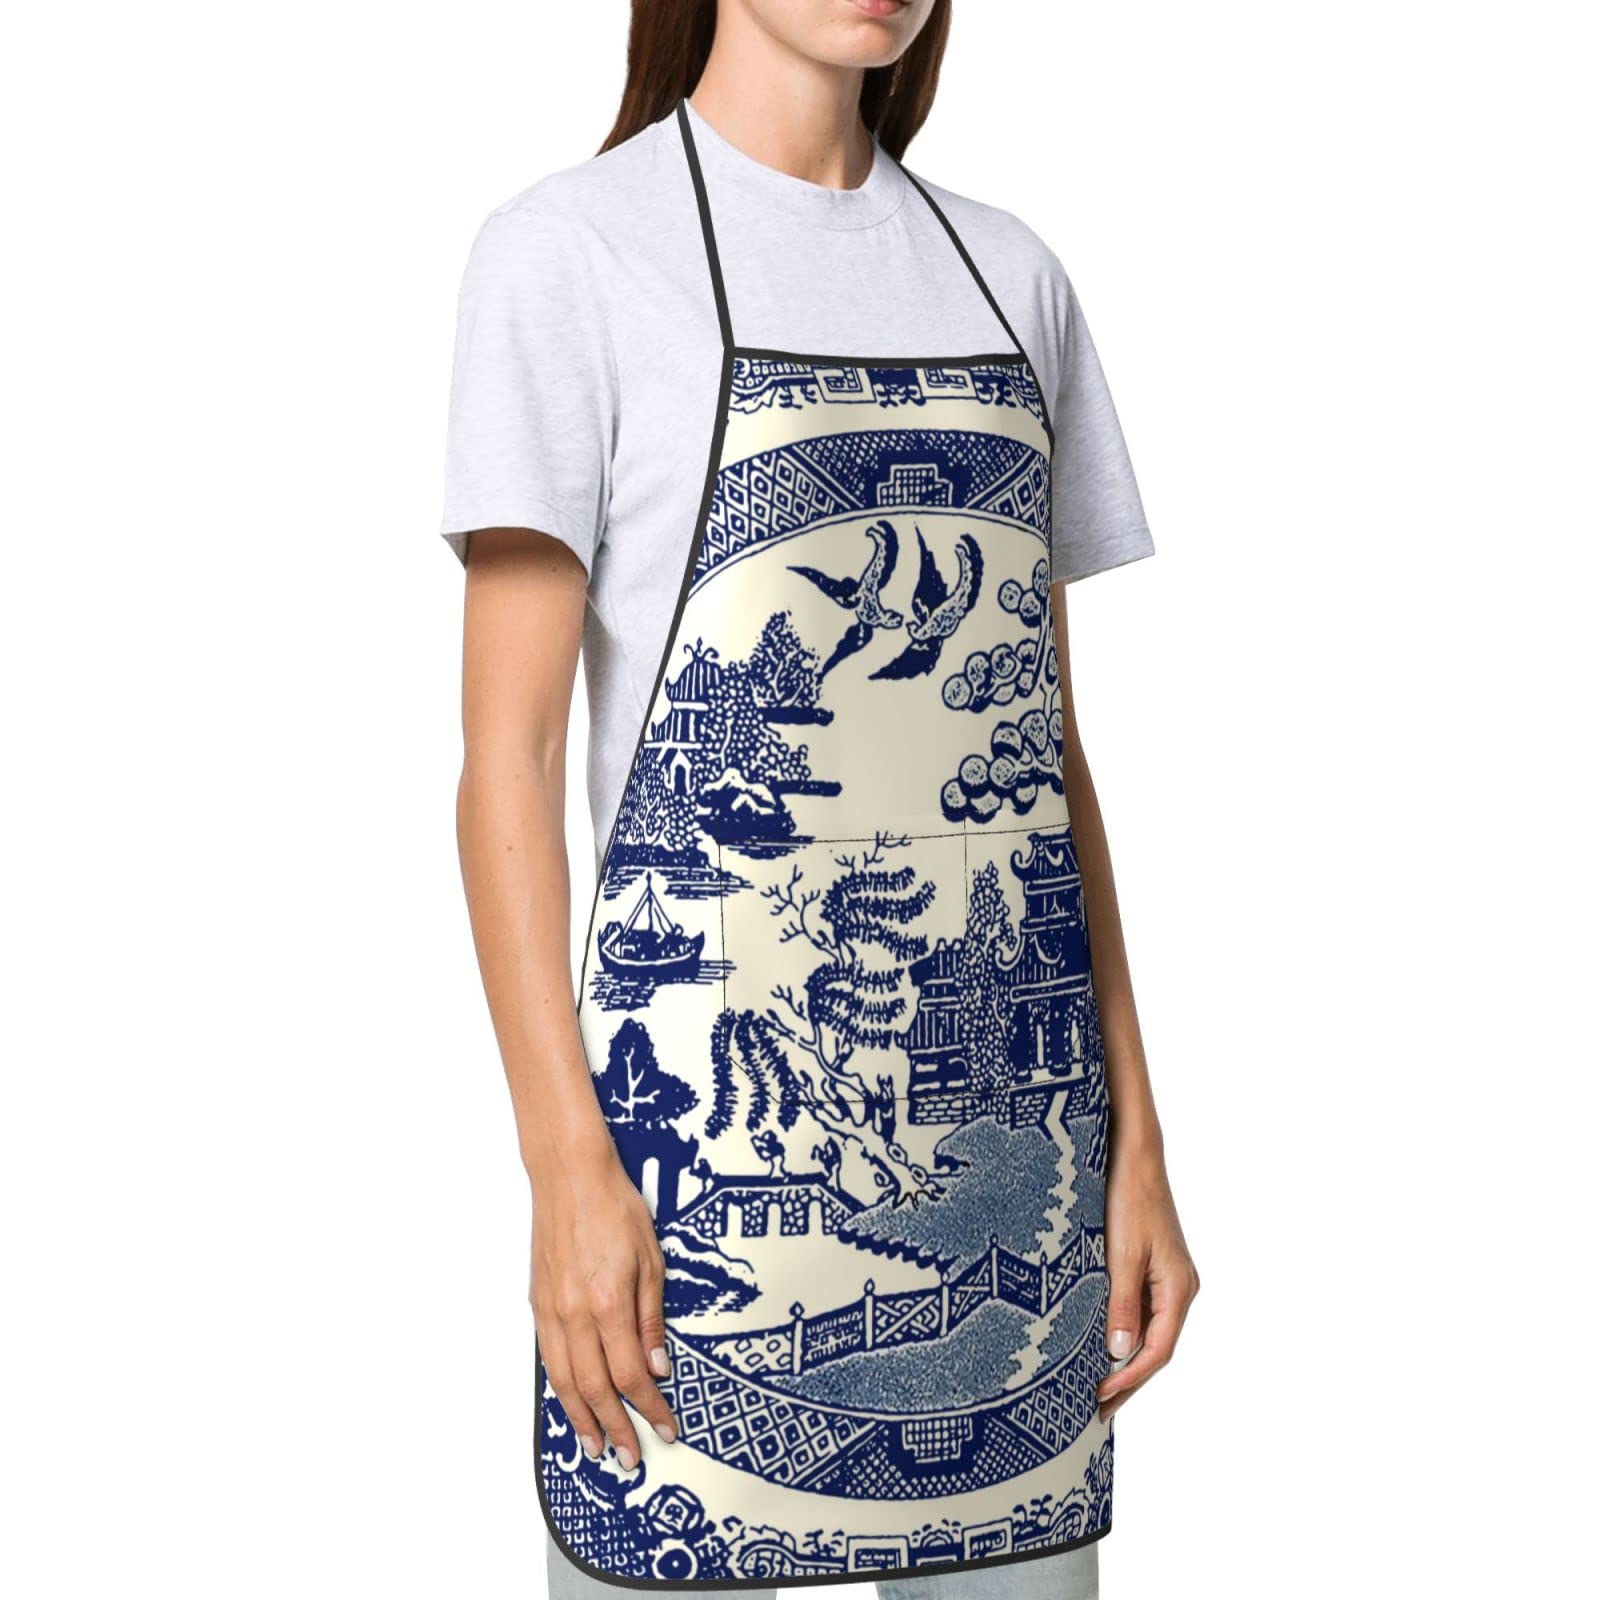 Oriental Style Chinese Blue Willow Aprons Women Men With Pocket Washable Anti-Stain Kitchen Chef Bib Apron For Cooking Garden Bbq Painting